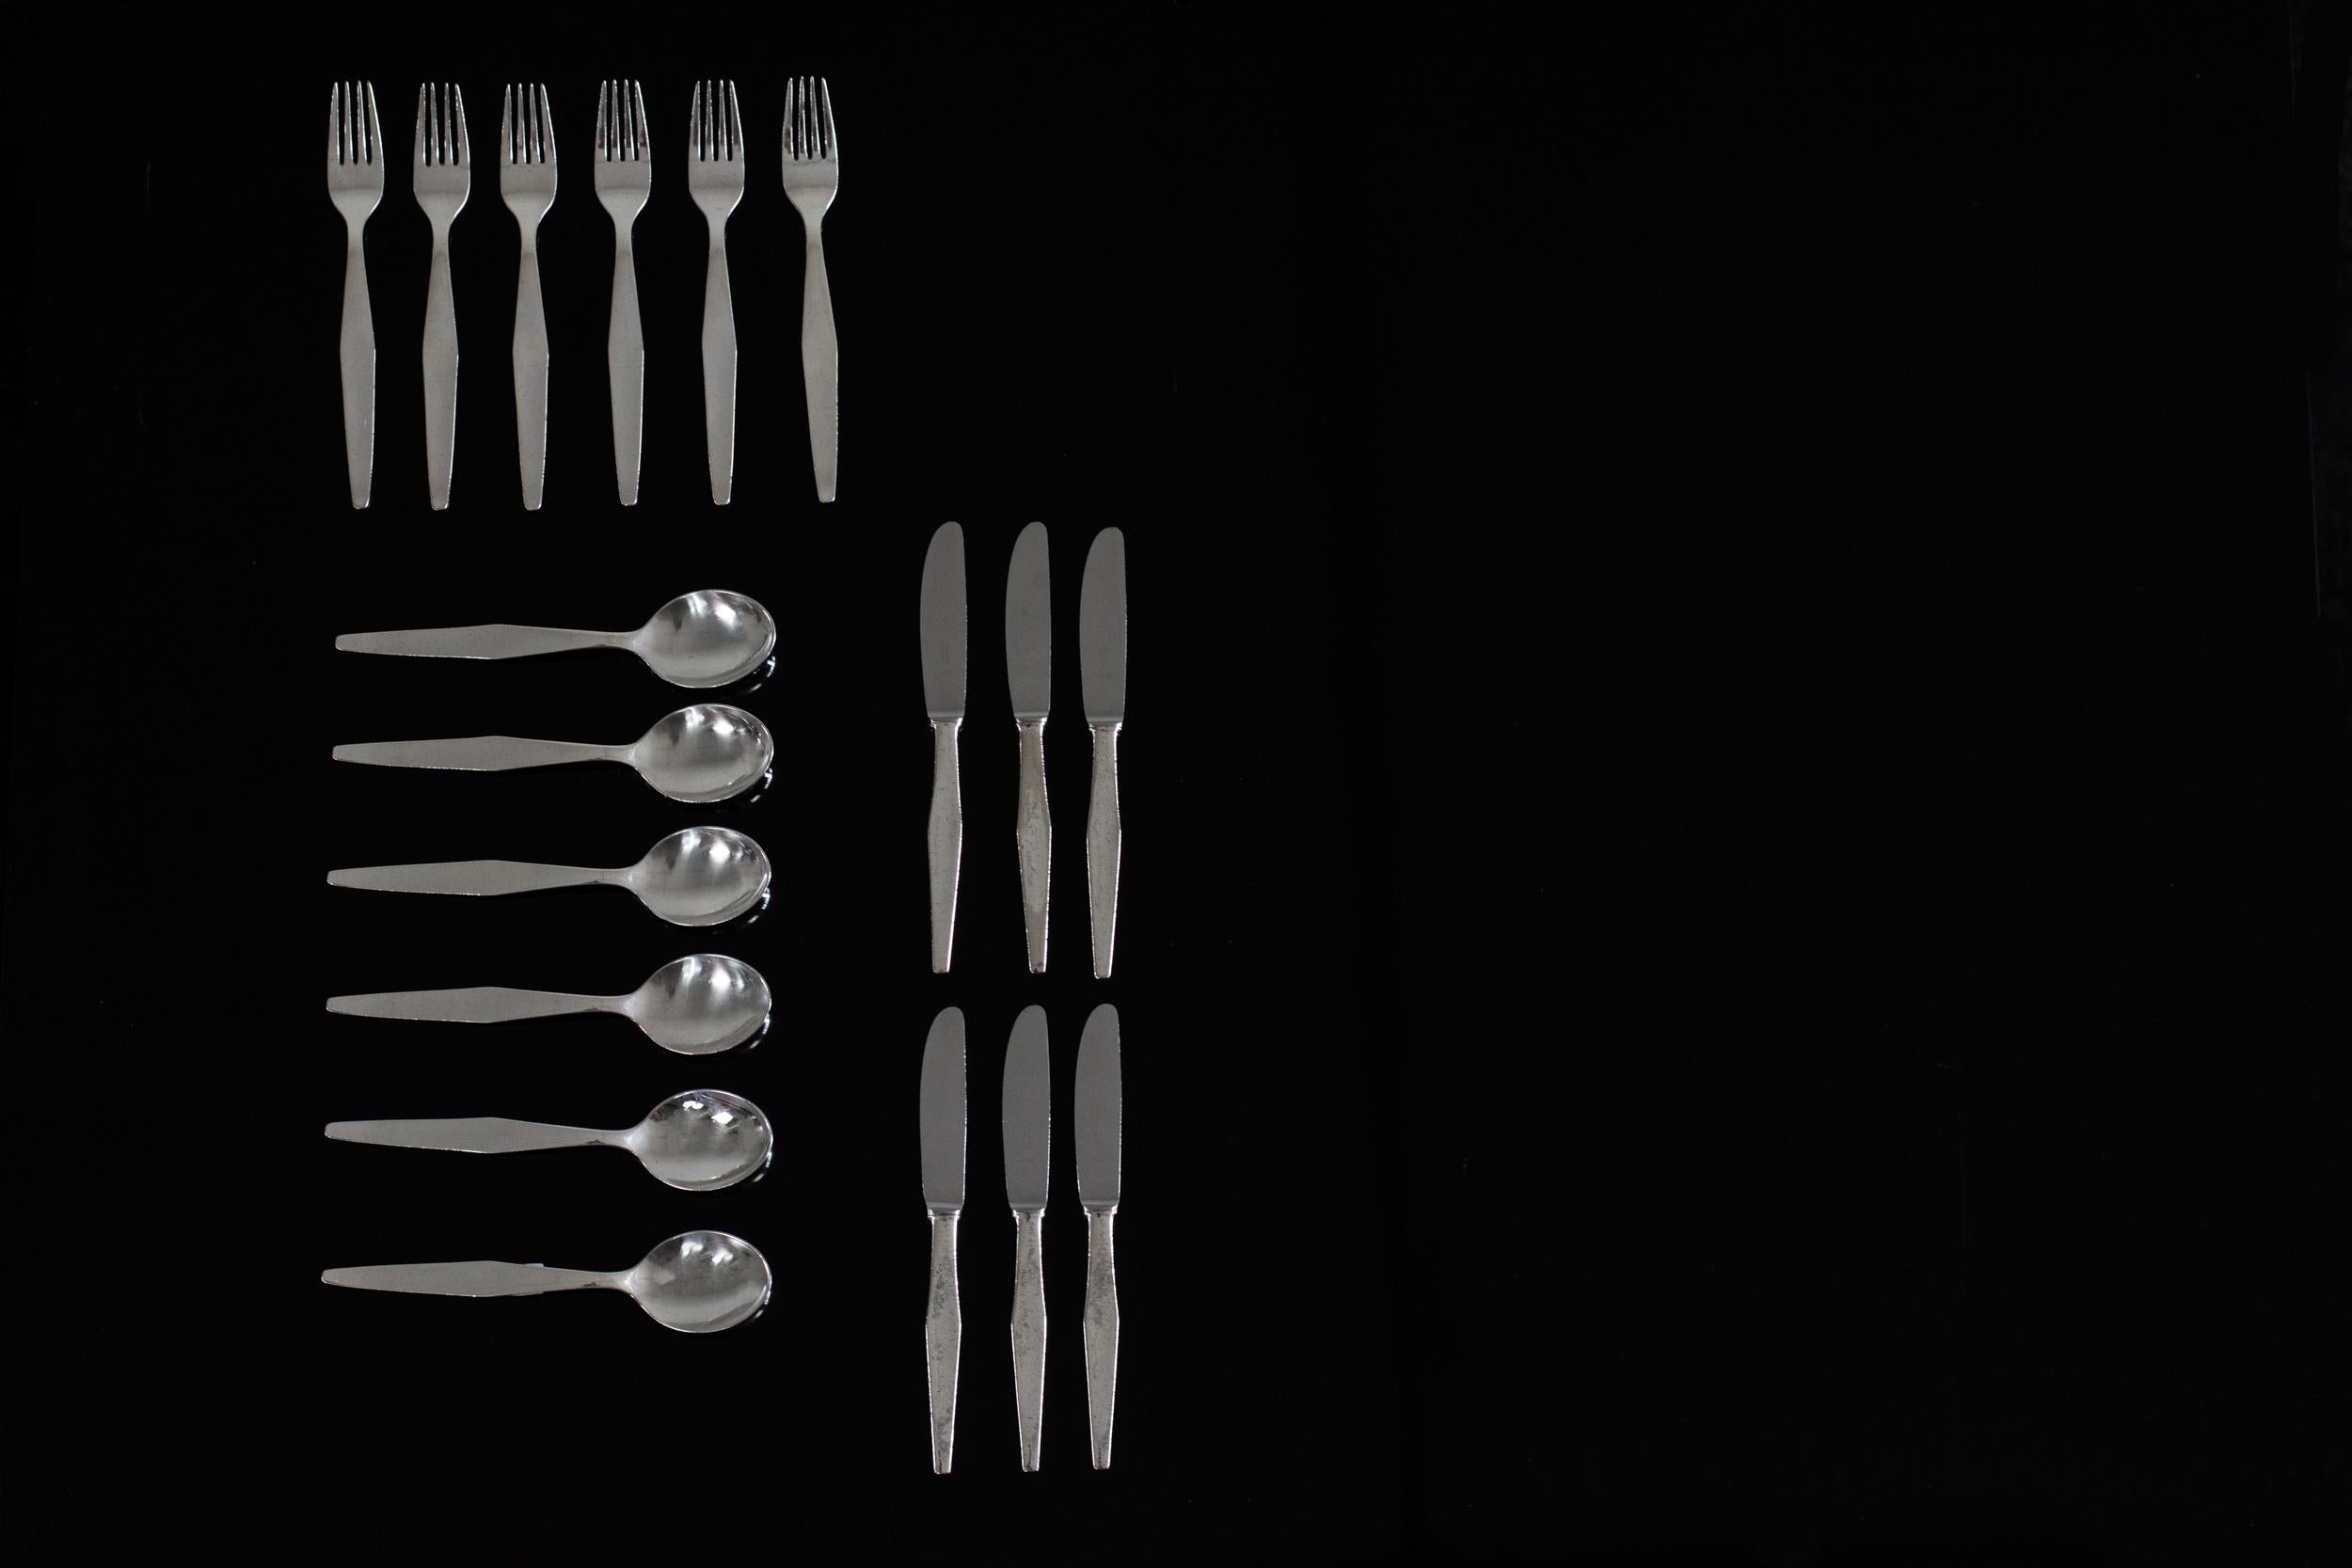 Cutlery silver service for six in nickel silver or German silver, this set includes a total of 18 pieces; 6 spoons, 6 forks, and 6 knives with a steel blade. 

Set designed by Gio Ponti for several hotels like the Granada, Solemare, and Murex,